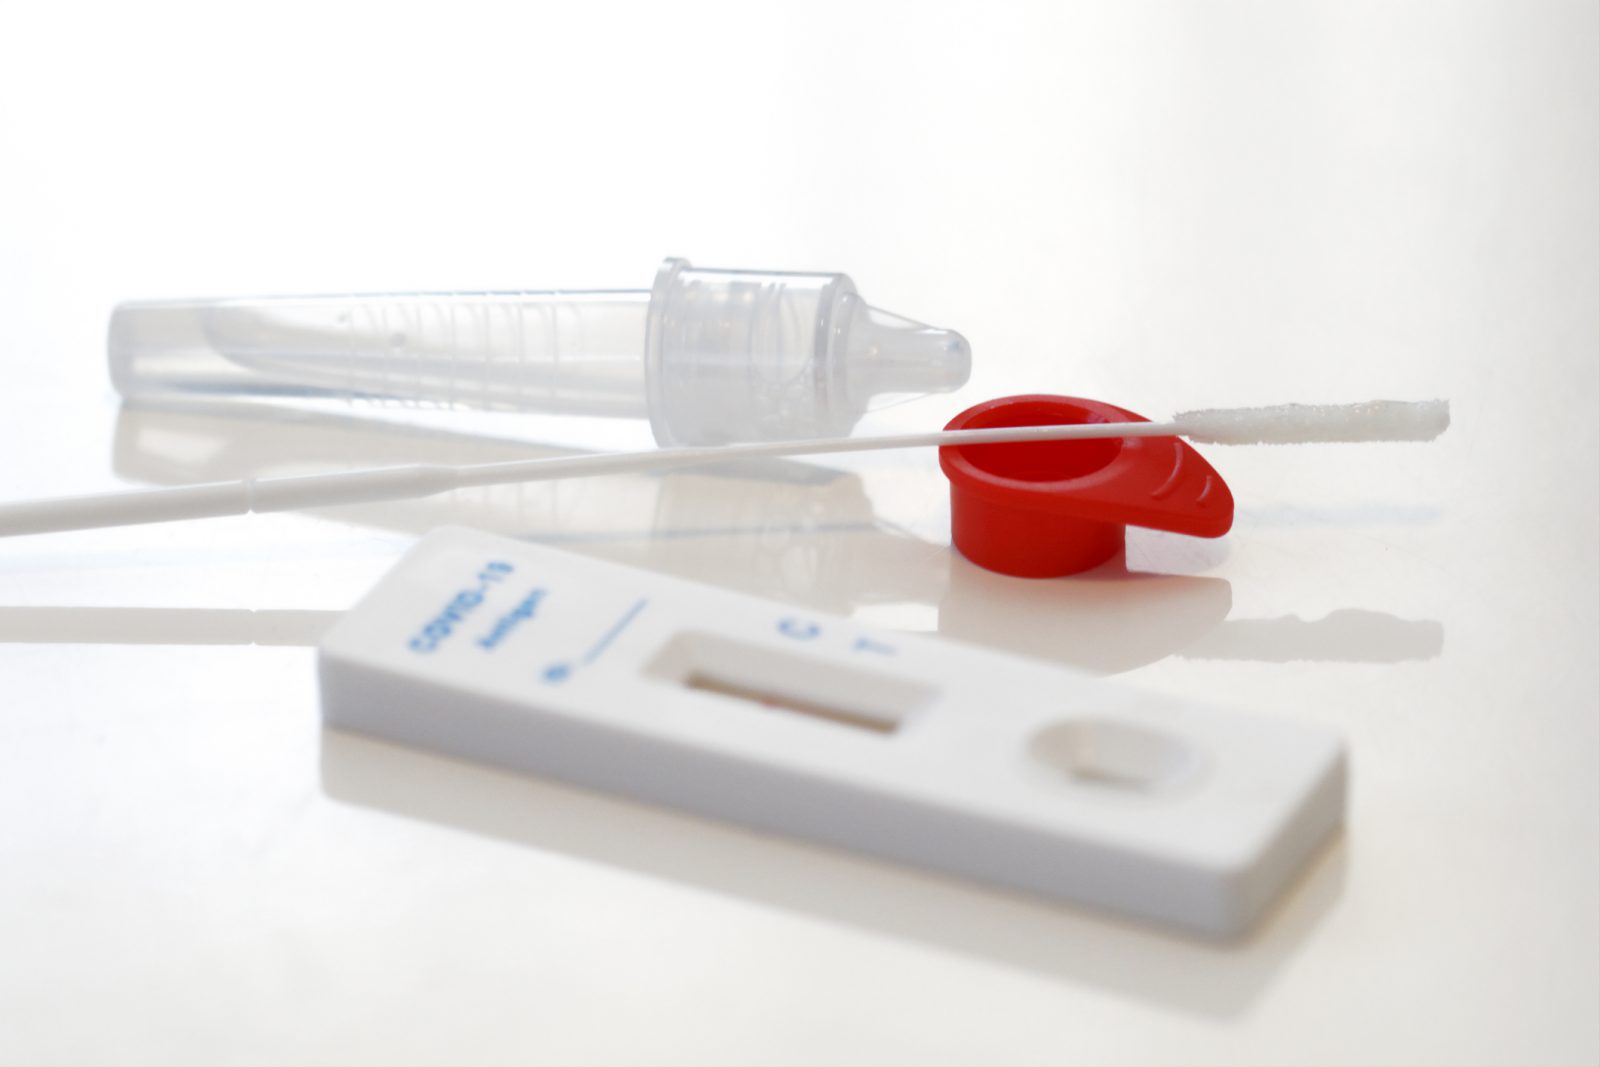 You are currently viewing Accuracy, Types of Rapid antigen tests, and Where to Find Them